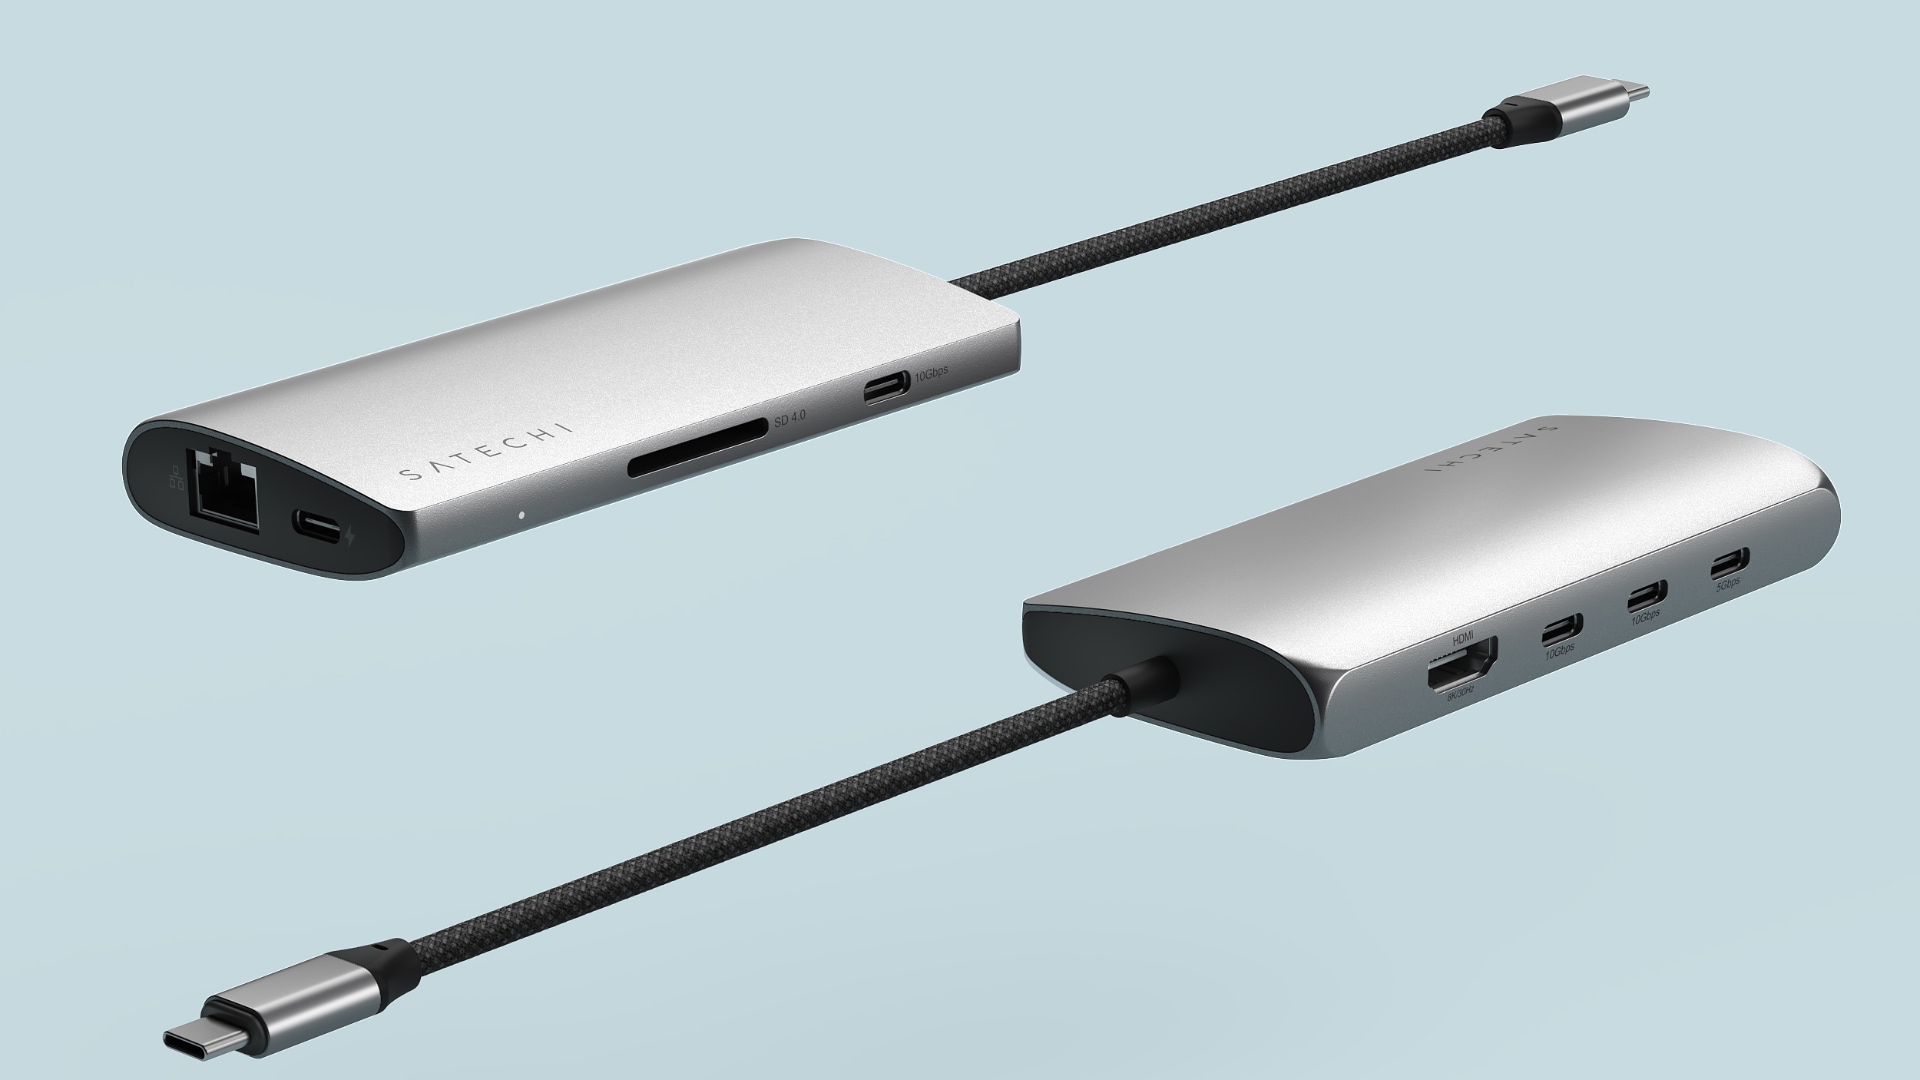 Satechi's USB-C adapters showcasing the front and back ports